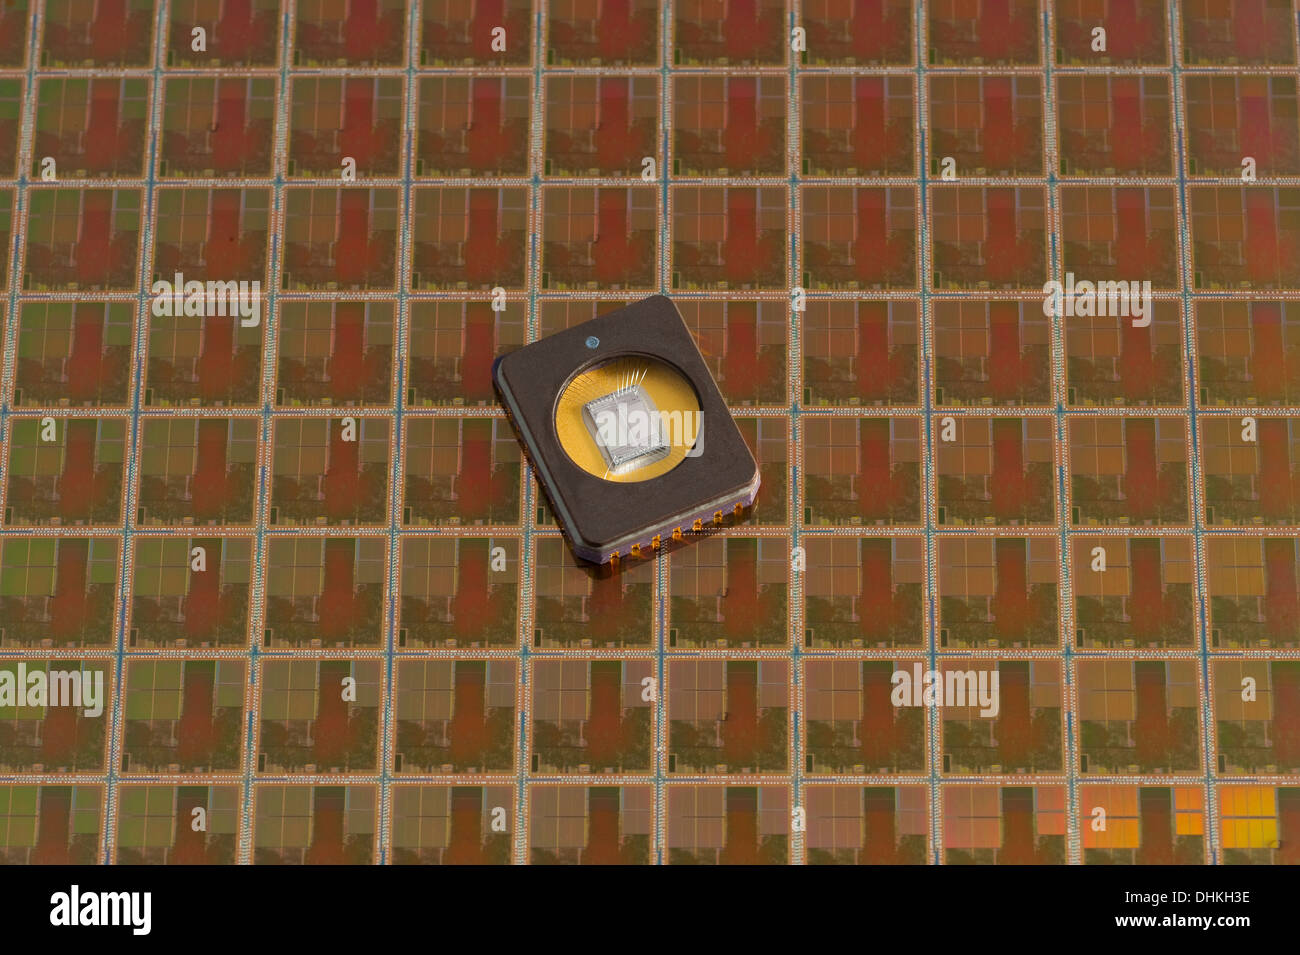 Memory chip, EPROM, on a silicon computer wafer.  The silicon die (memory chip) is visible under a glass window. Stock Photo